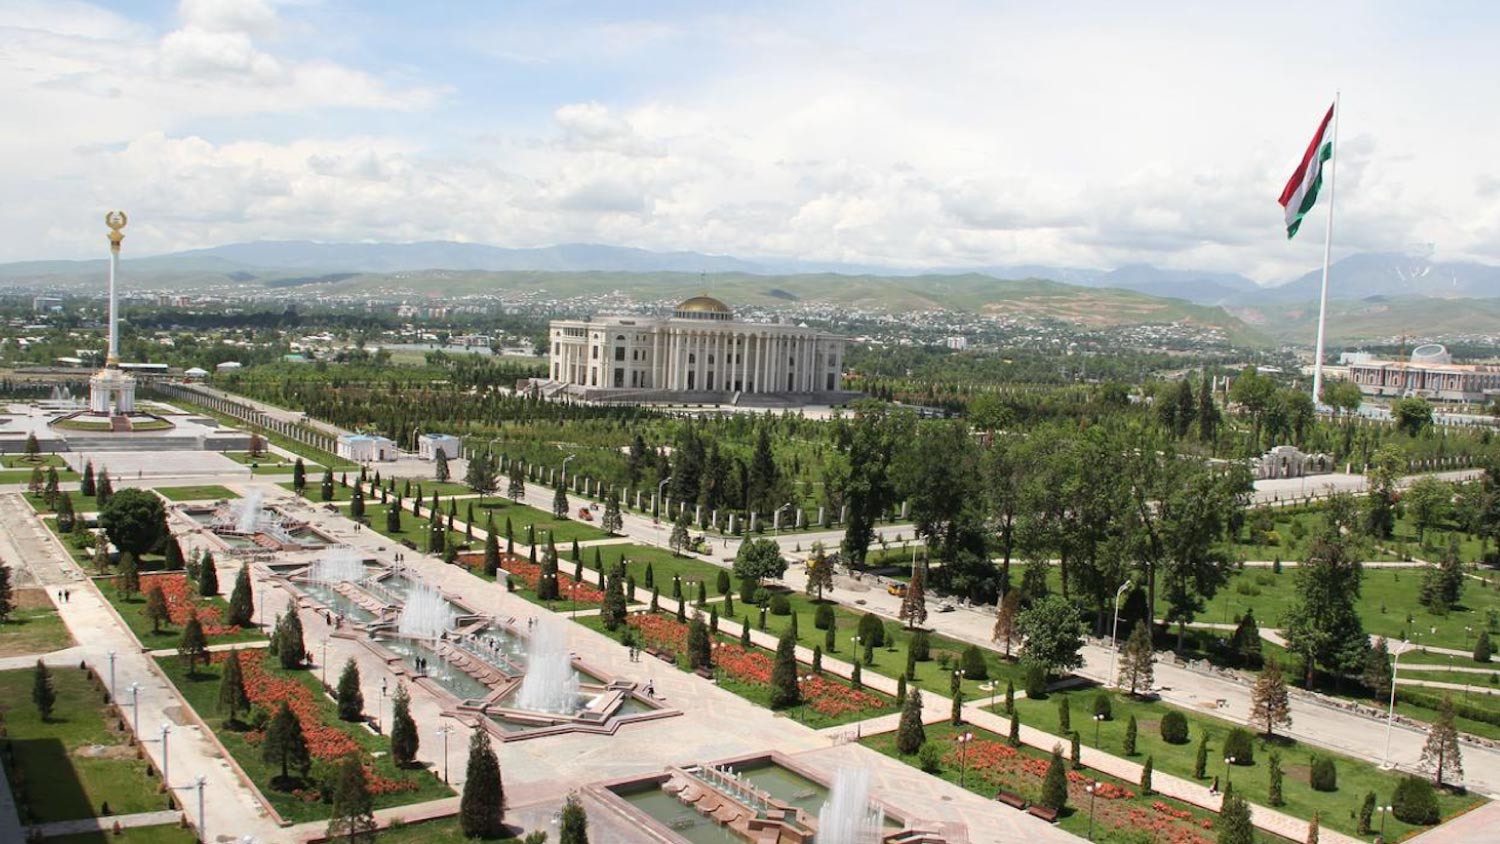 Capture the beauty of Dushanbe in Tajikistan, a captivating stop on the journey to Australia spanning 21 countries, tailored for self-flying pilots. Immerse yourself in the rich culture, stunning landscapes, and unique charm of this dynamic Central Asian city